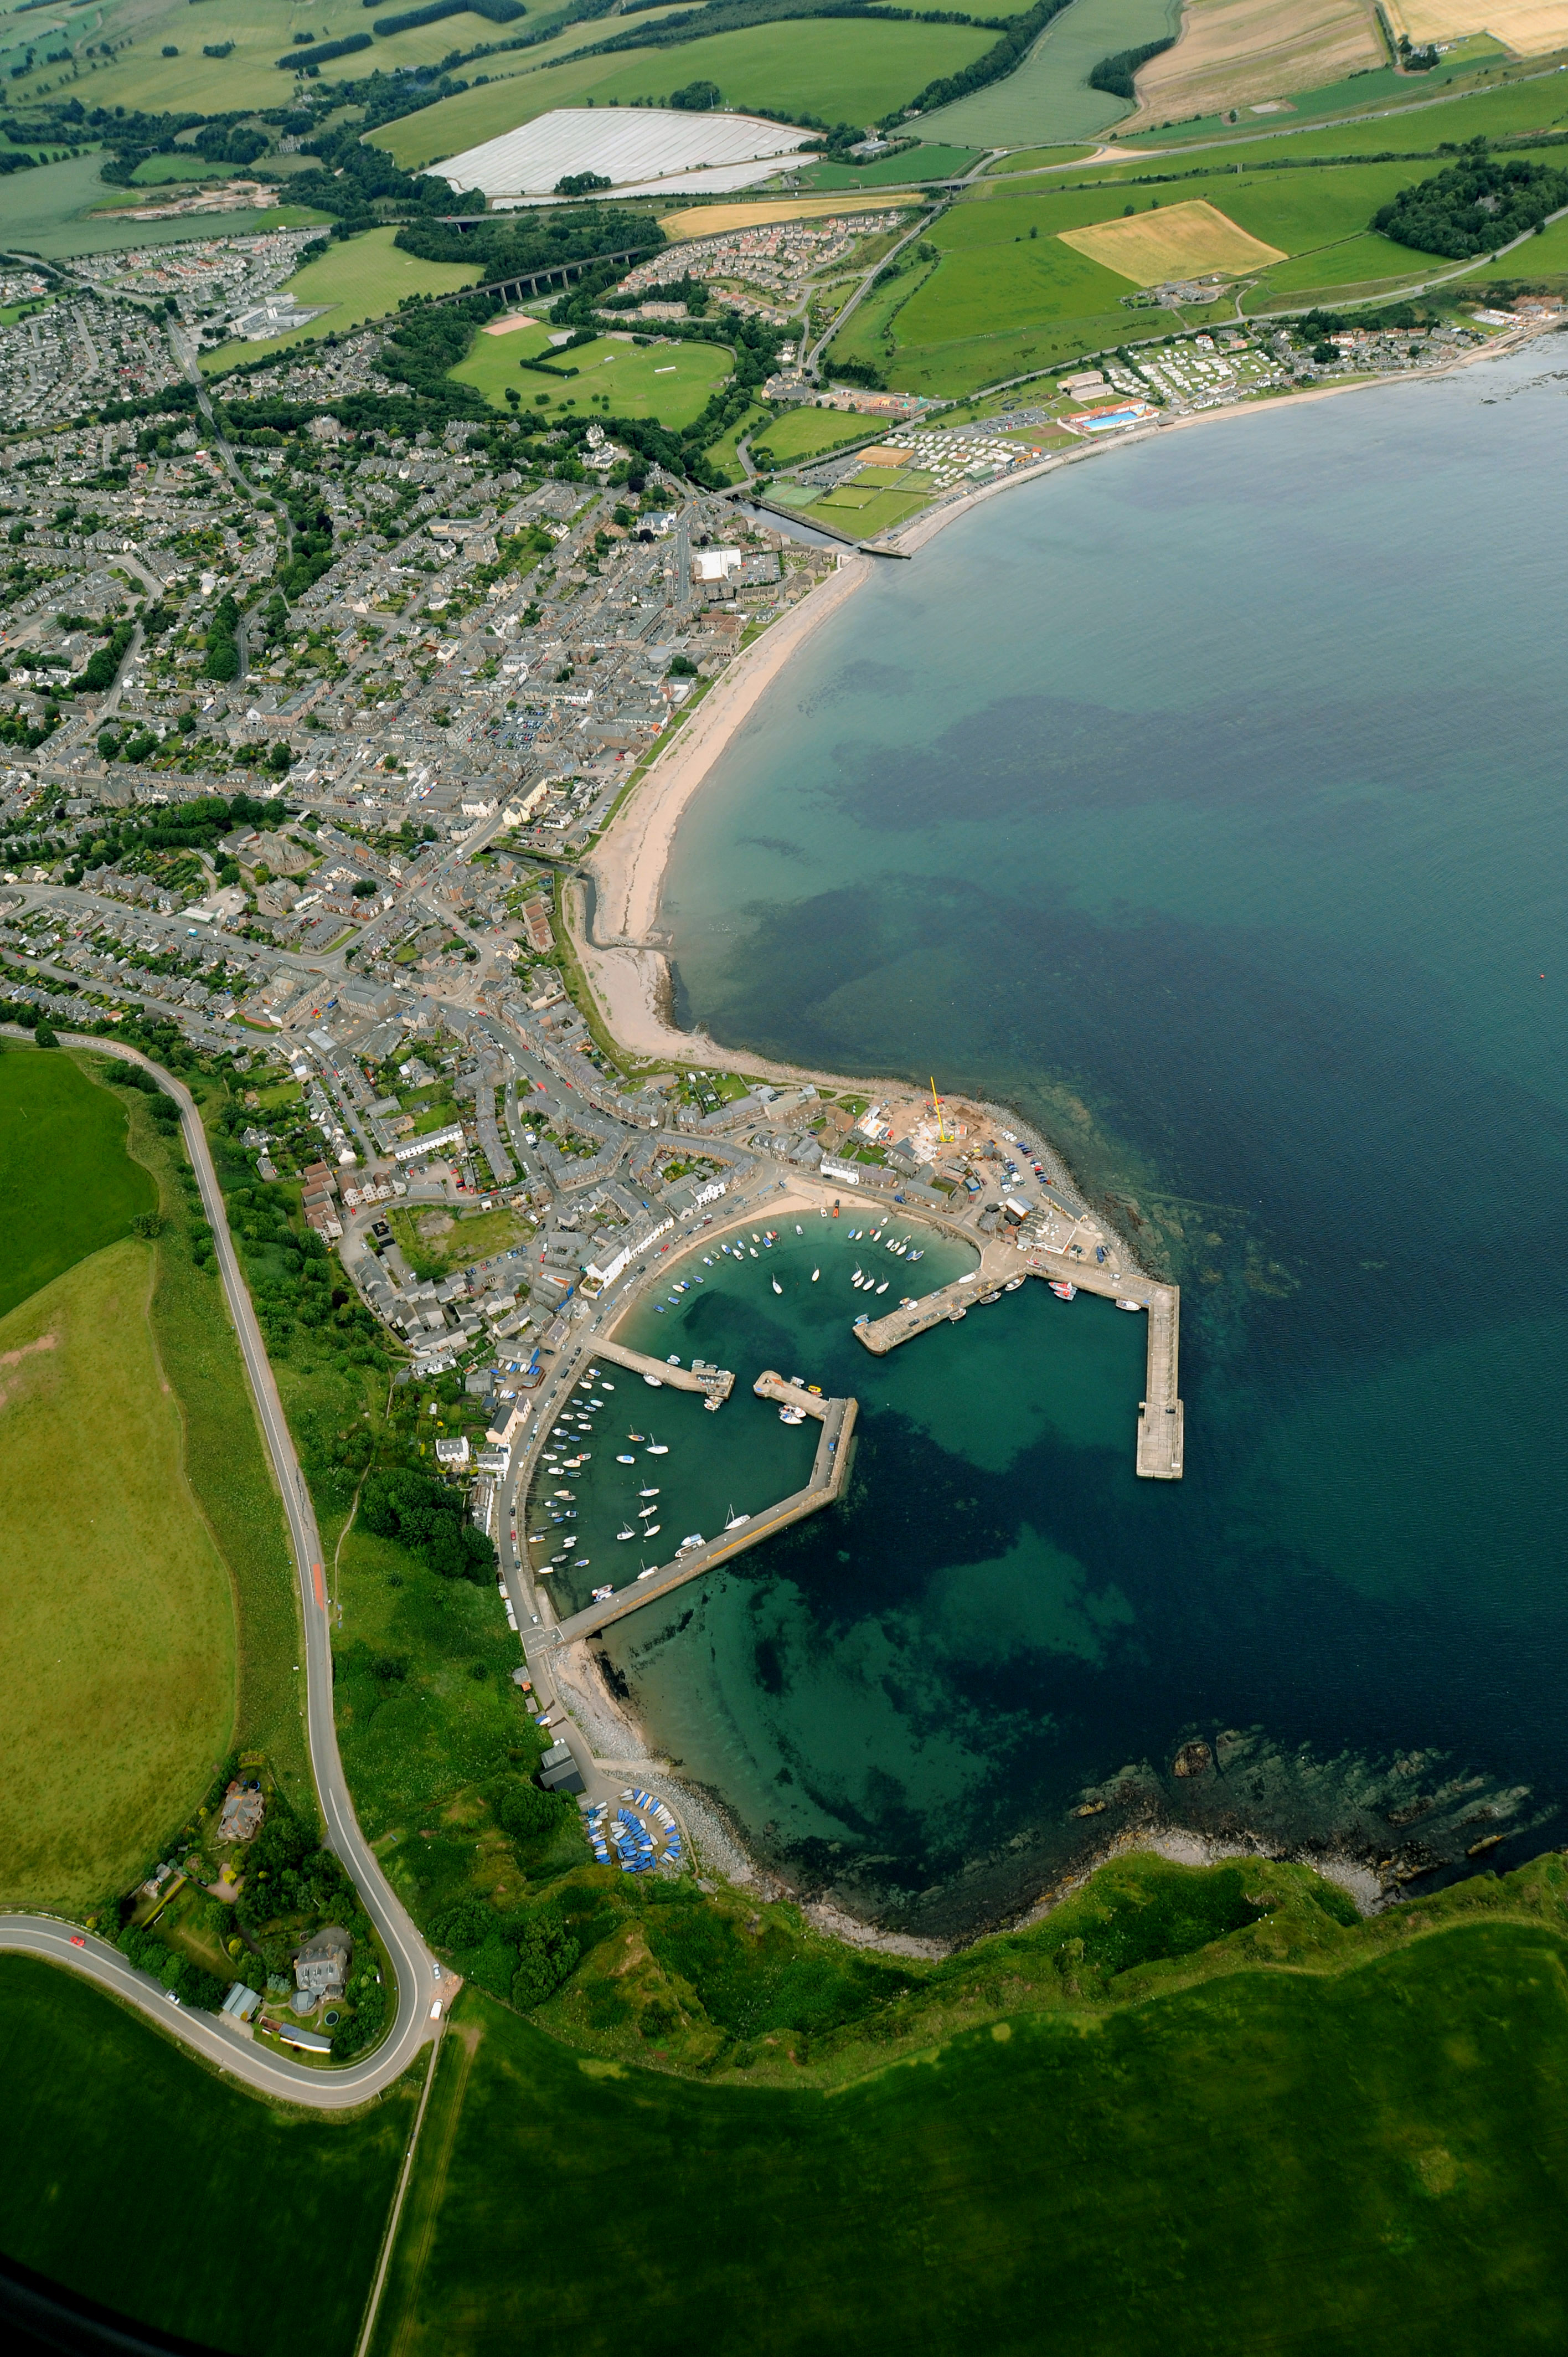 Ariel image looking over Stonehaven and the harbour.